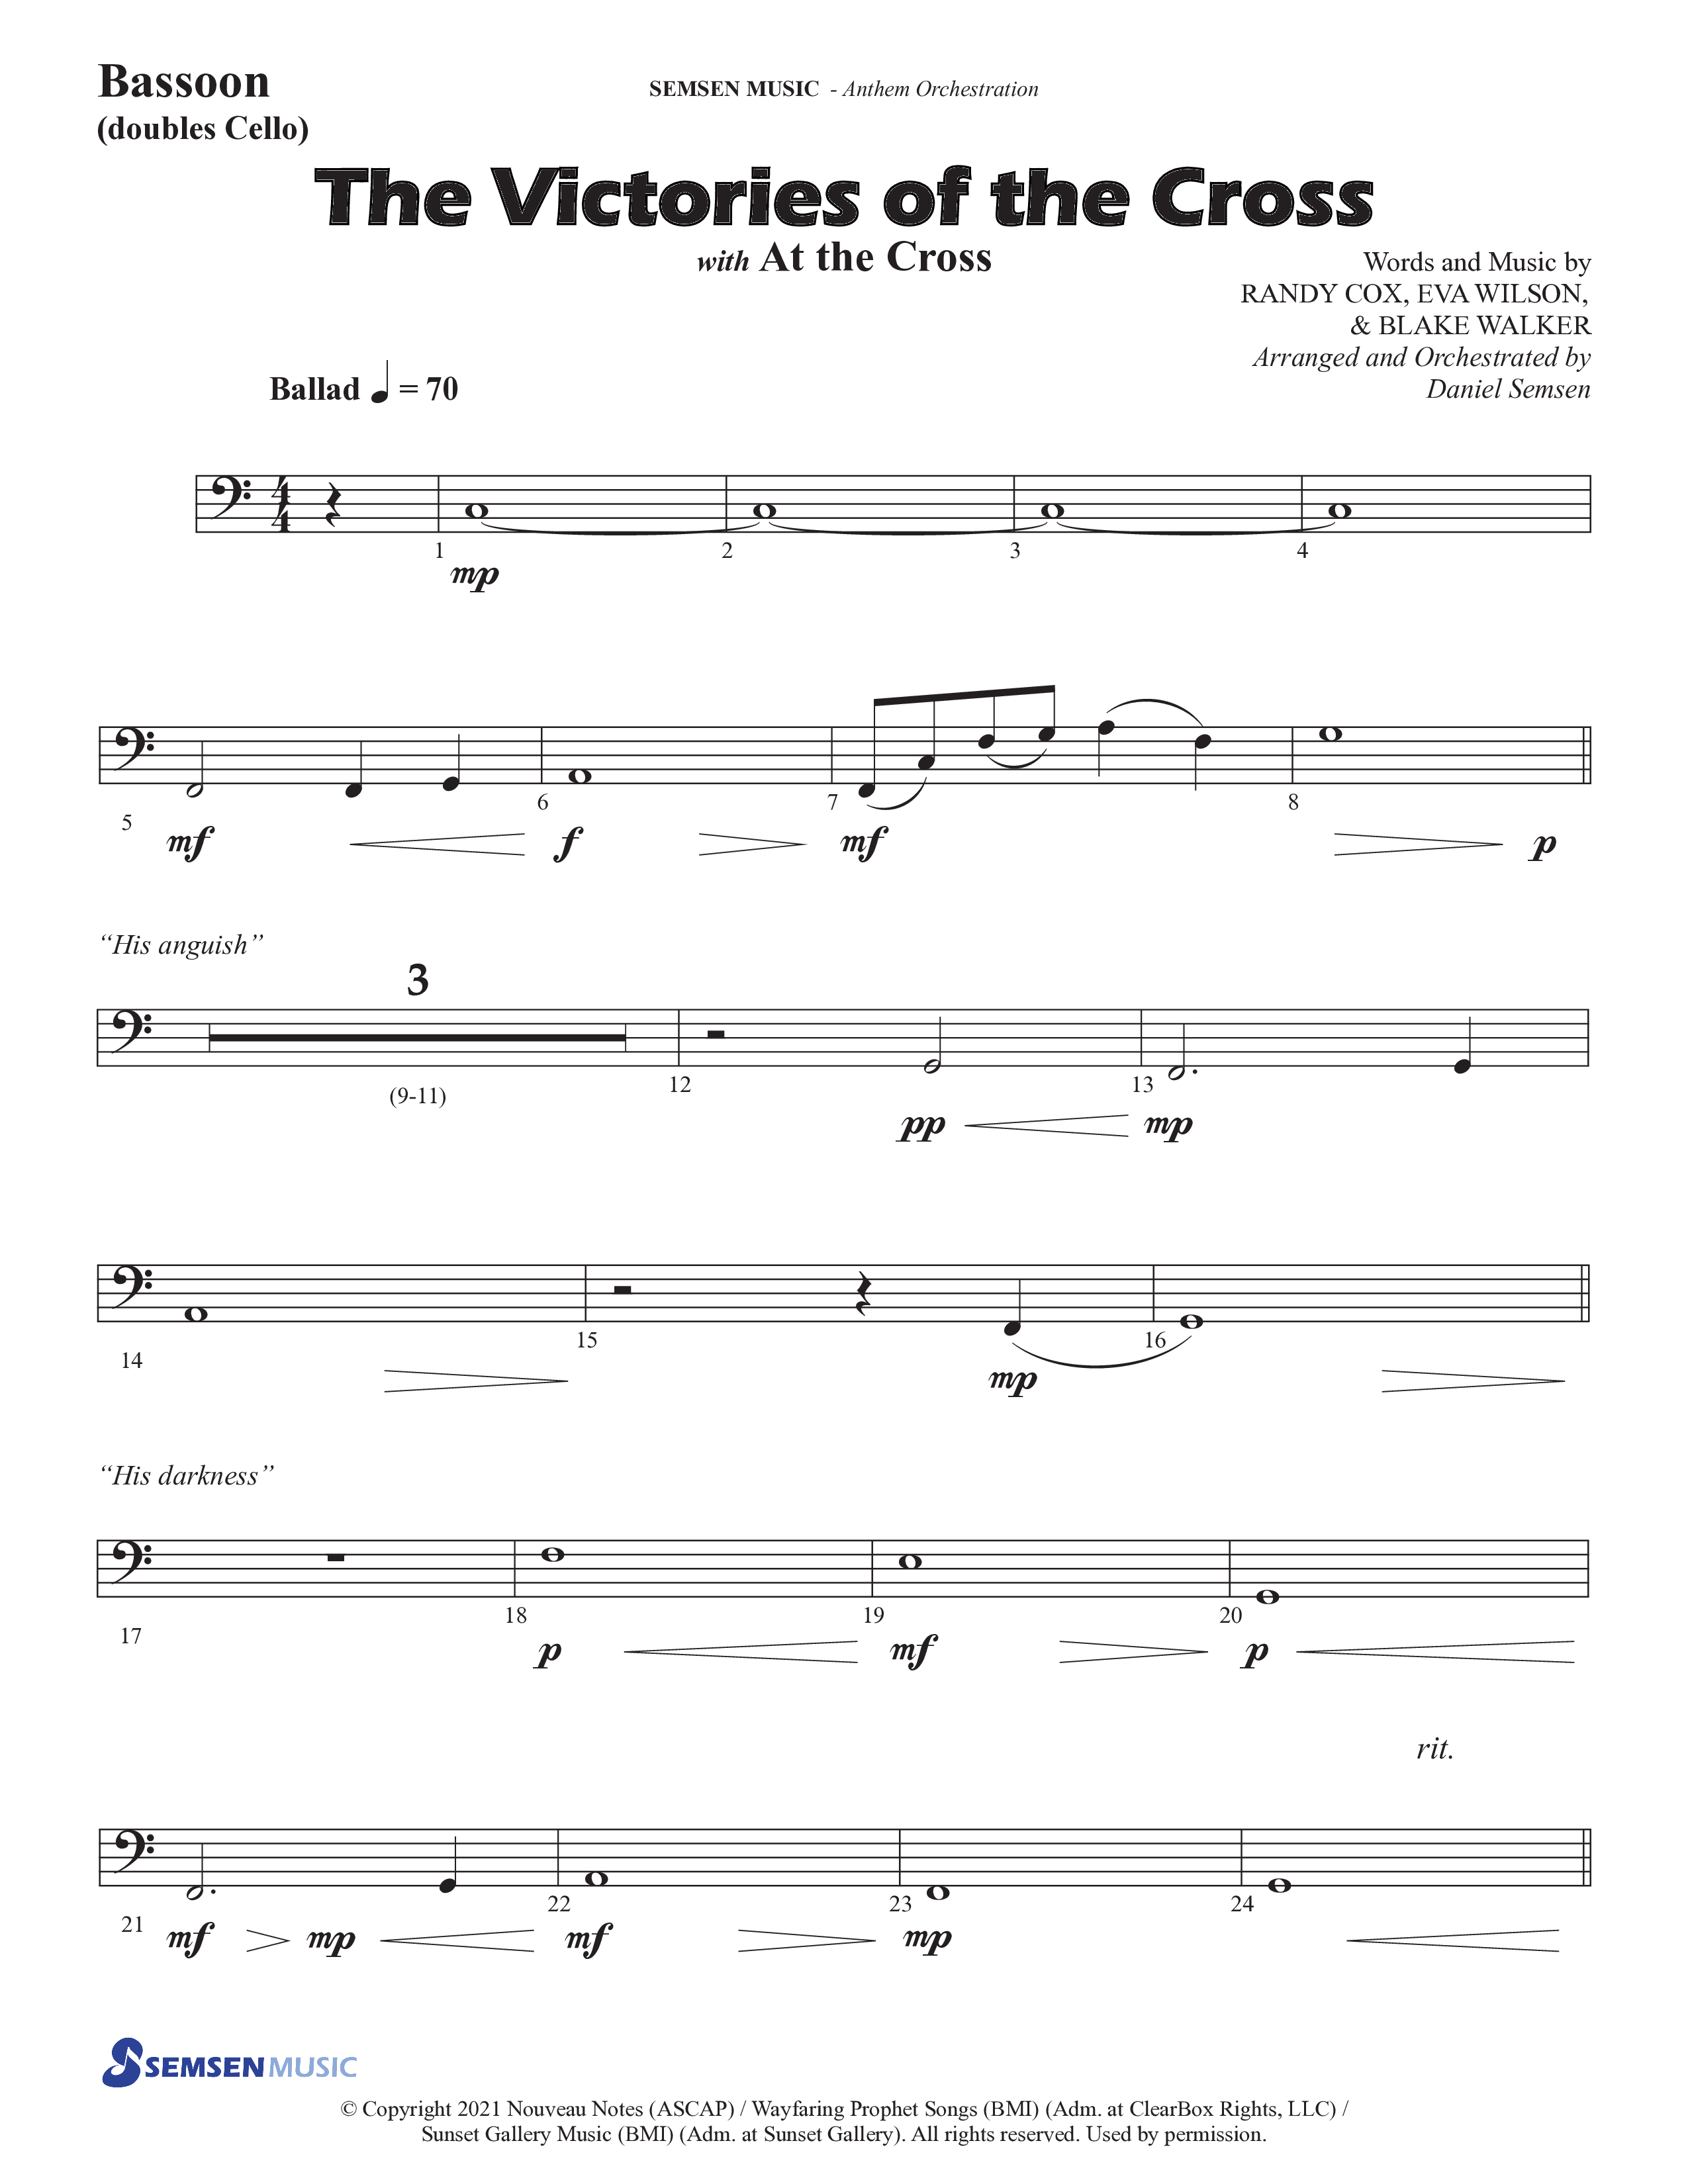 The Victories Of The Cross (with At The Cross) (Choral Anthem SATB) Bassoon (Semsen Music / Arr. Daniel Semsen)